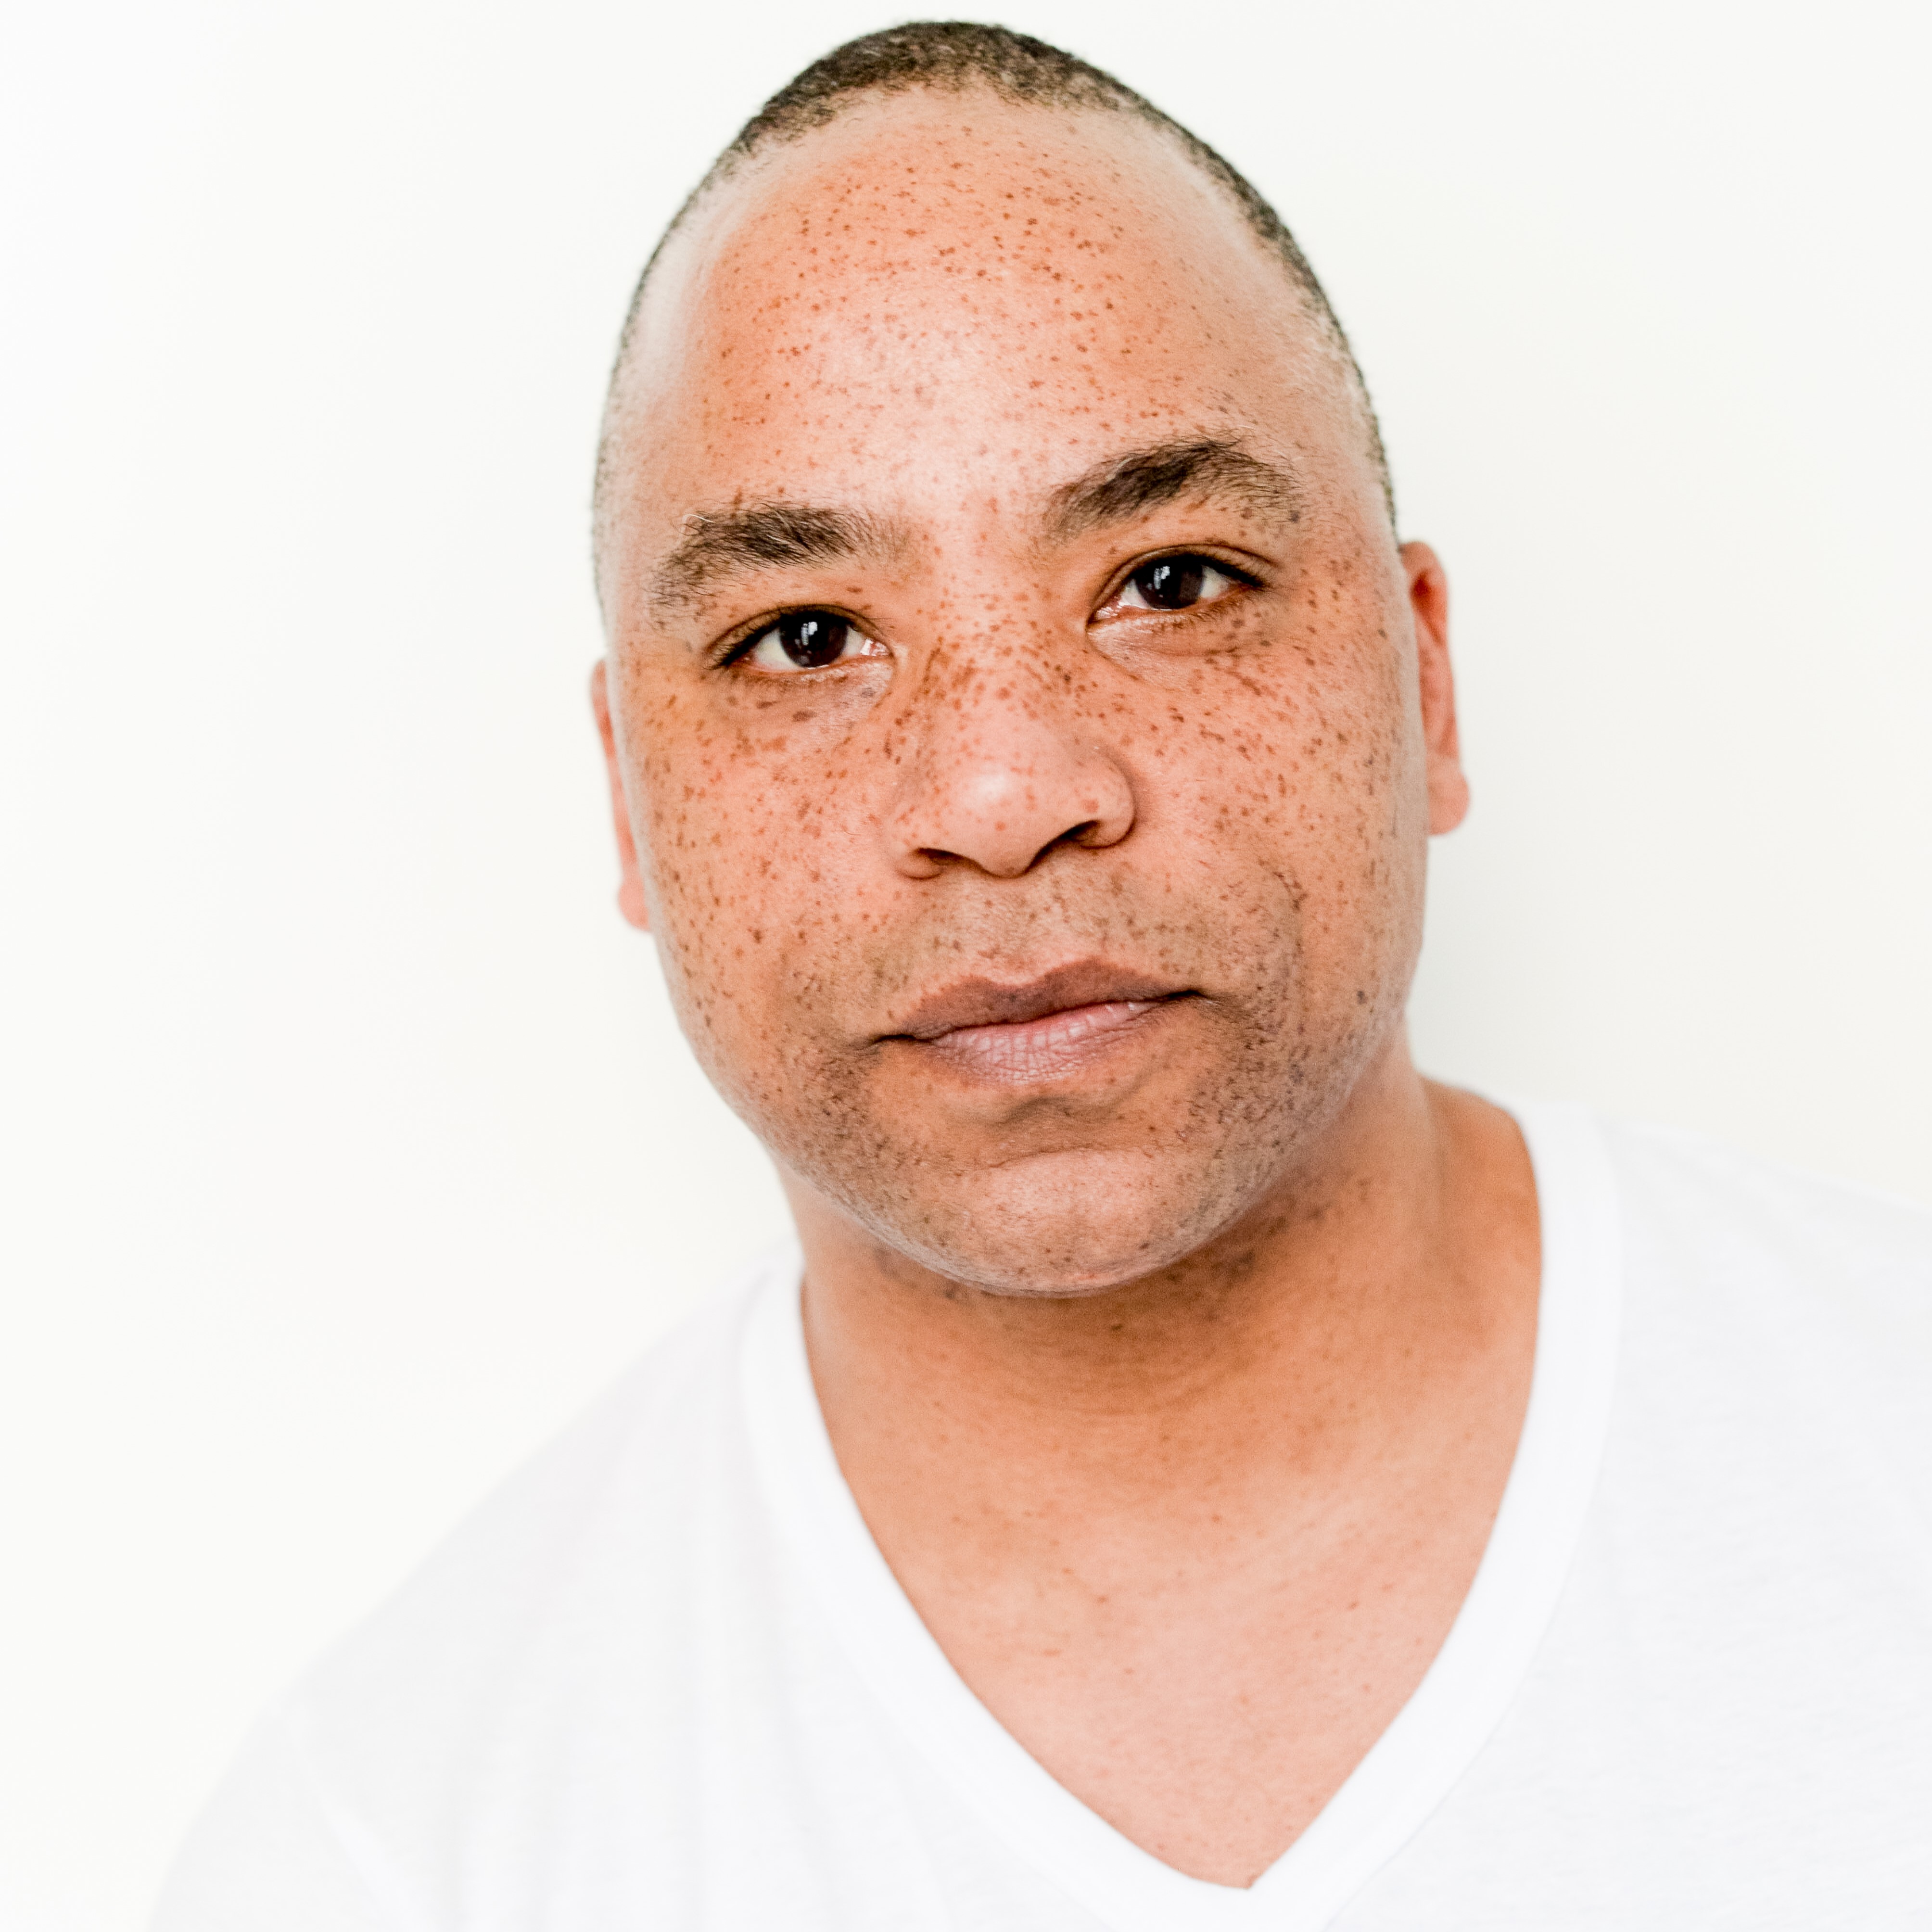 Chancz Perry joins SK Arts- Headshot of black man with freckles wearing a white v neck t-shirt and a white background.